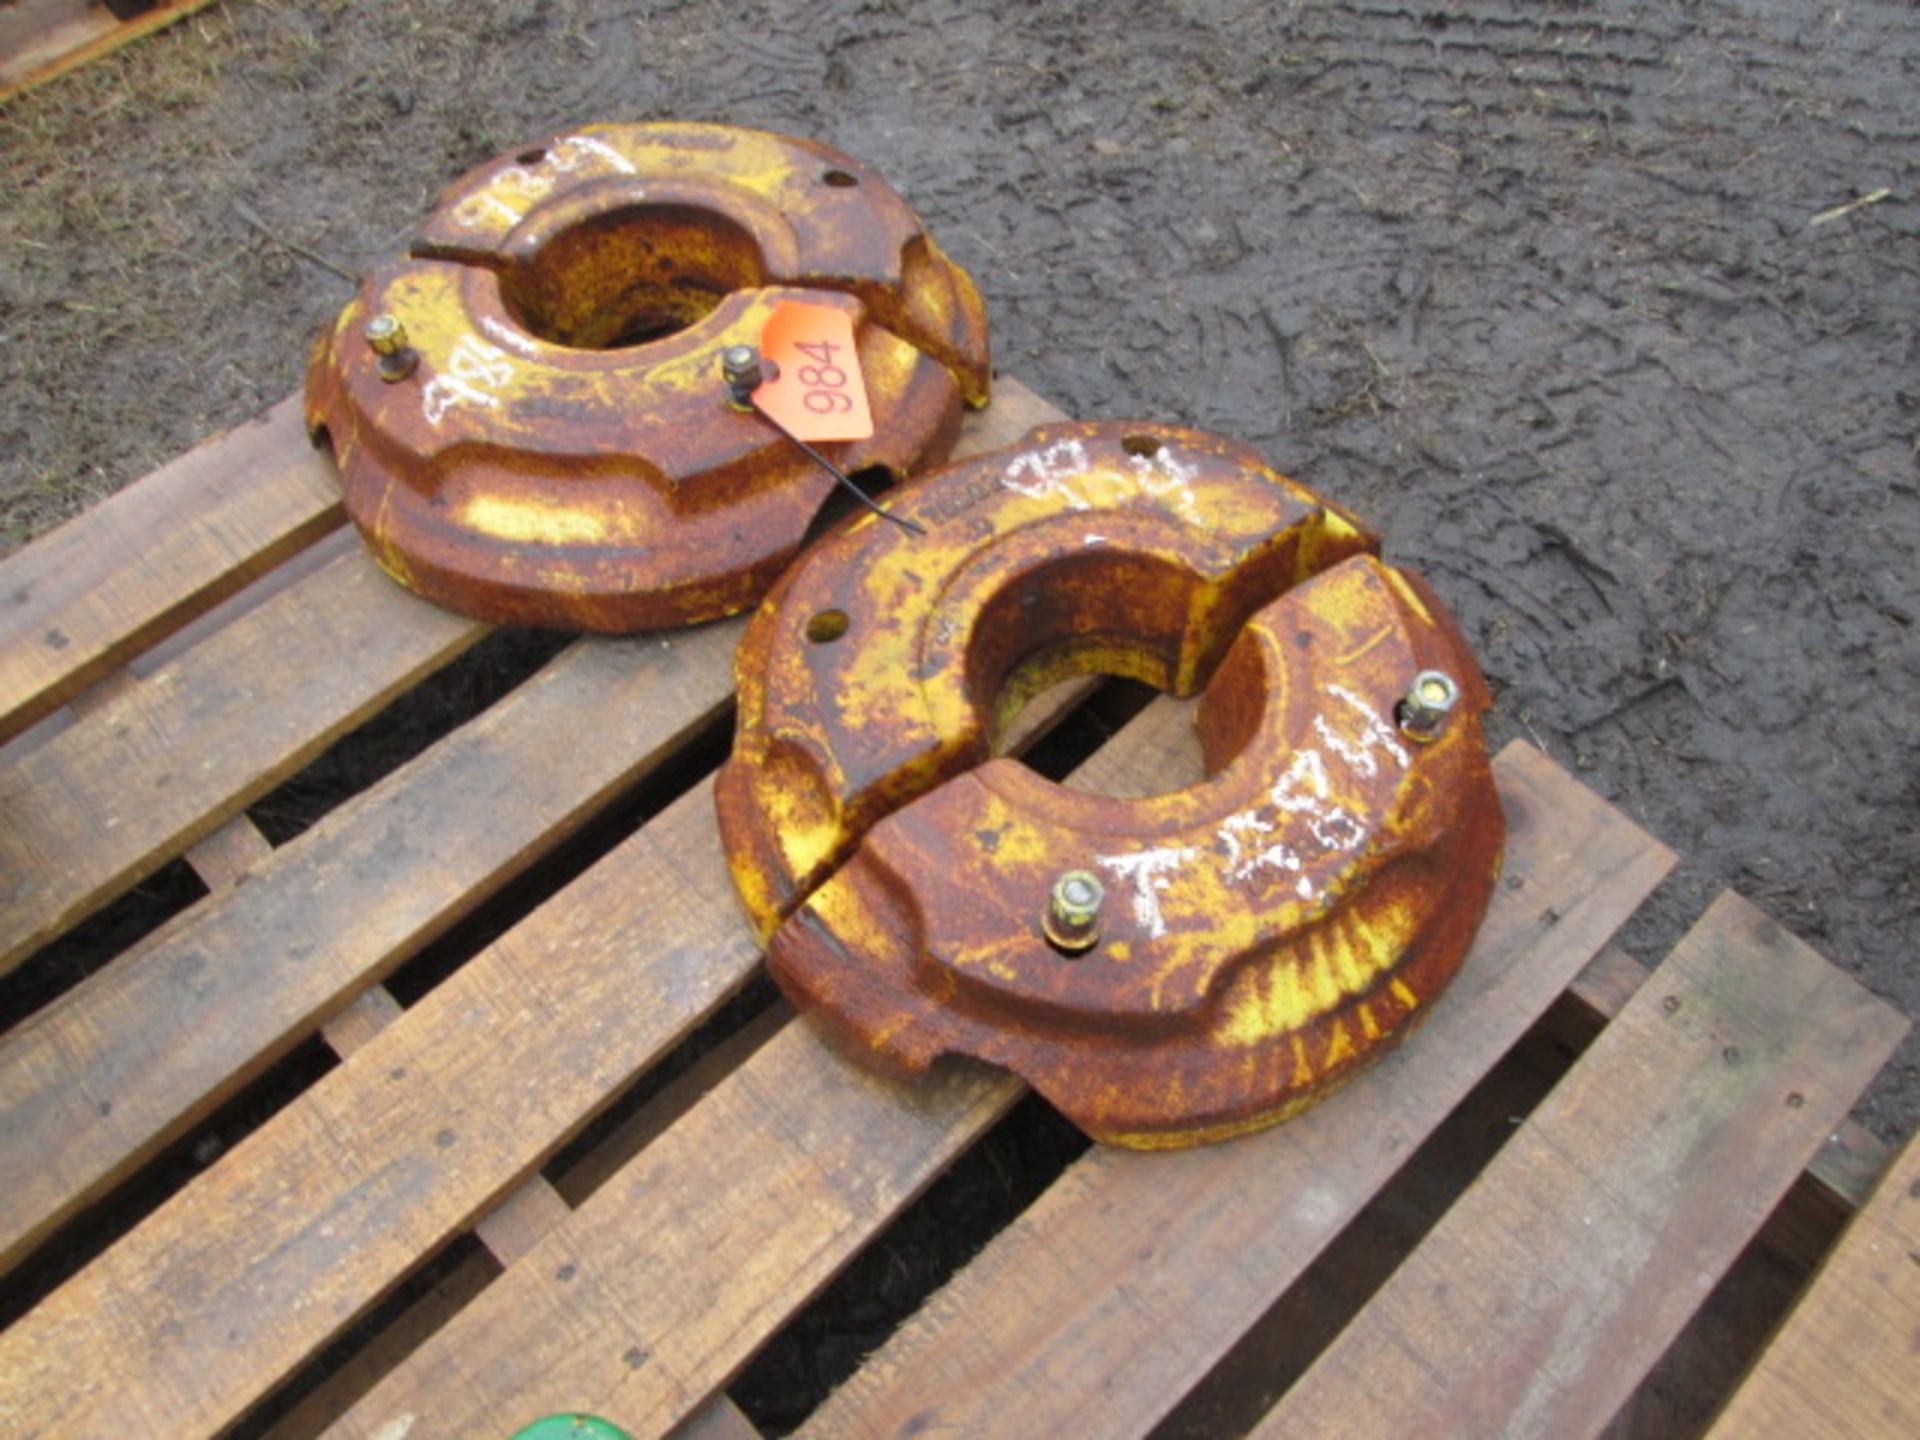 PAIR OF YELLOW REAR WEIGHTS, 1 pair, selling together for 1 price - Image 3 of 3